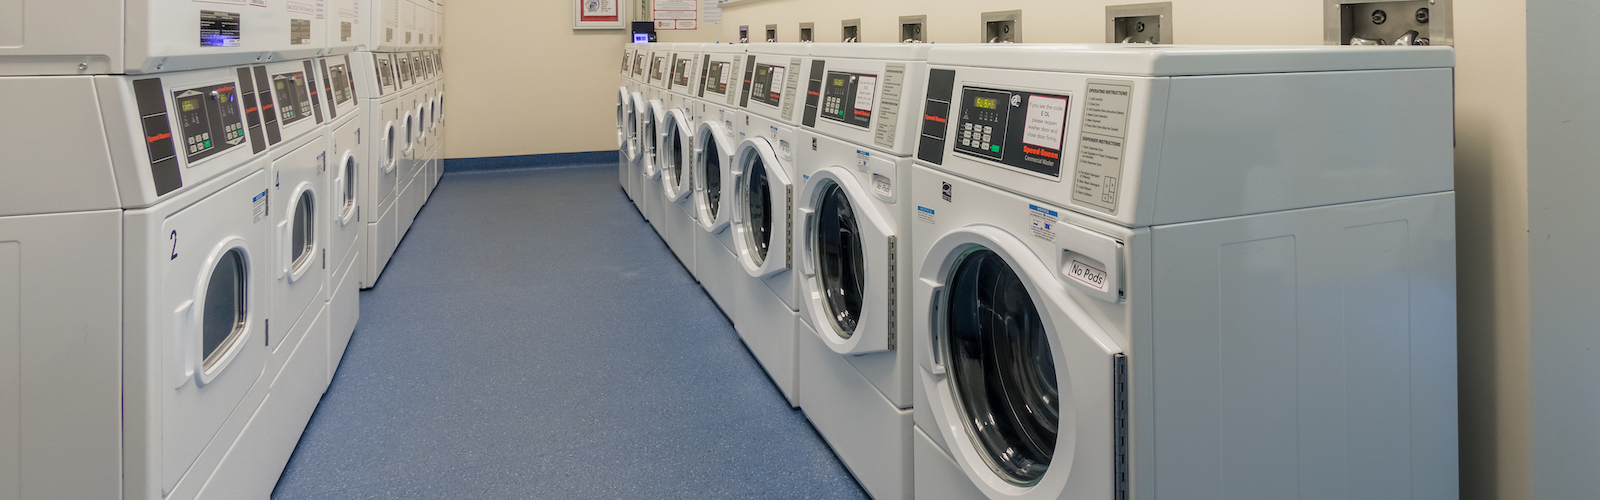 Washers and dryers in the Ogg laundry room